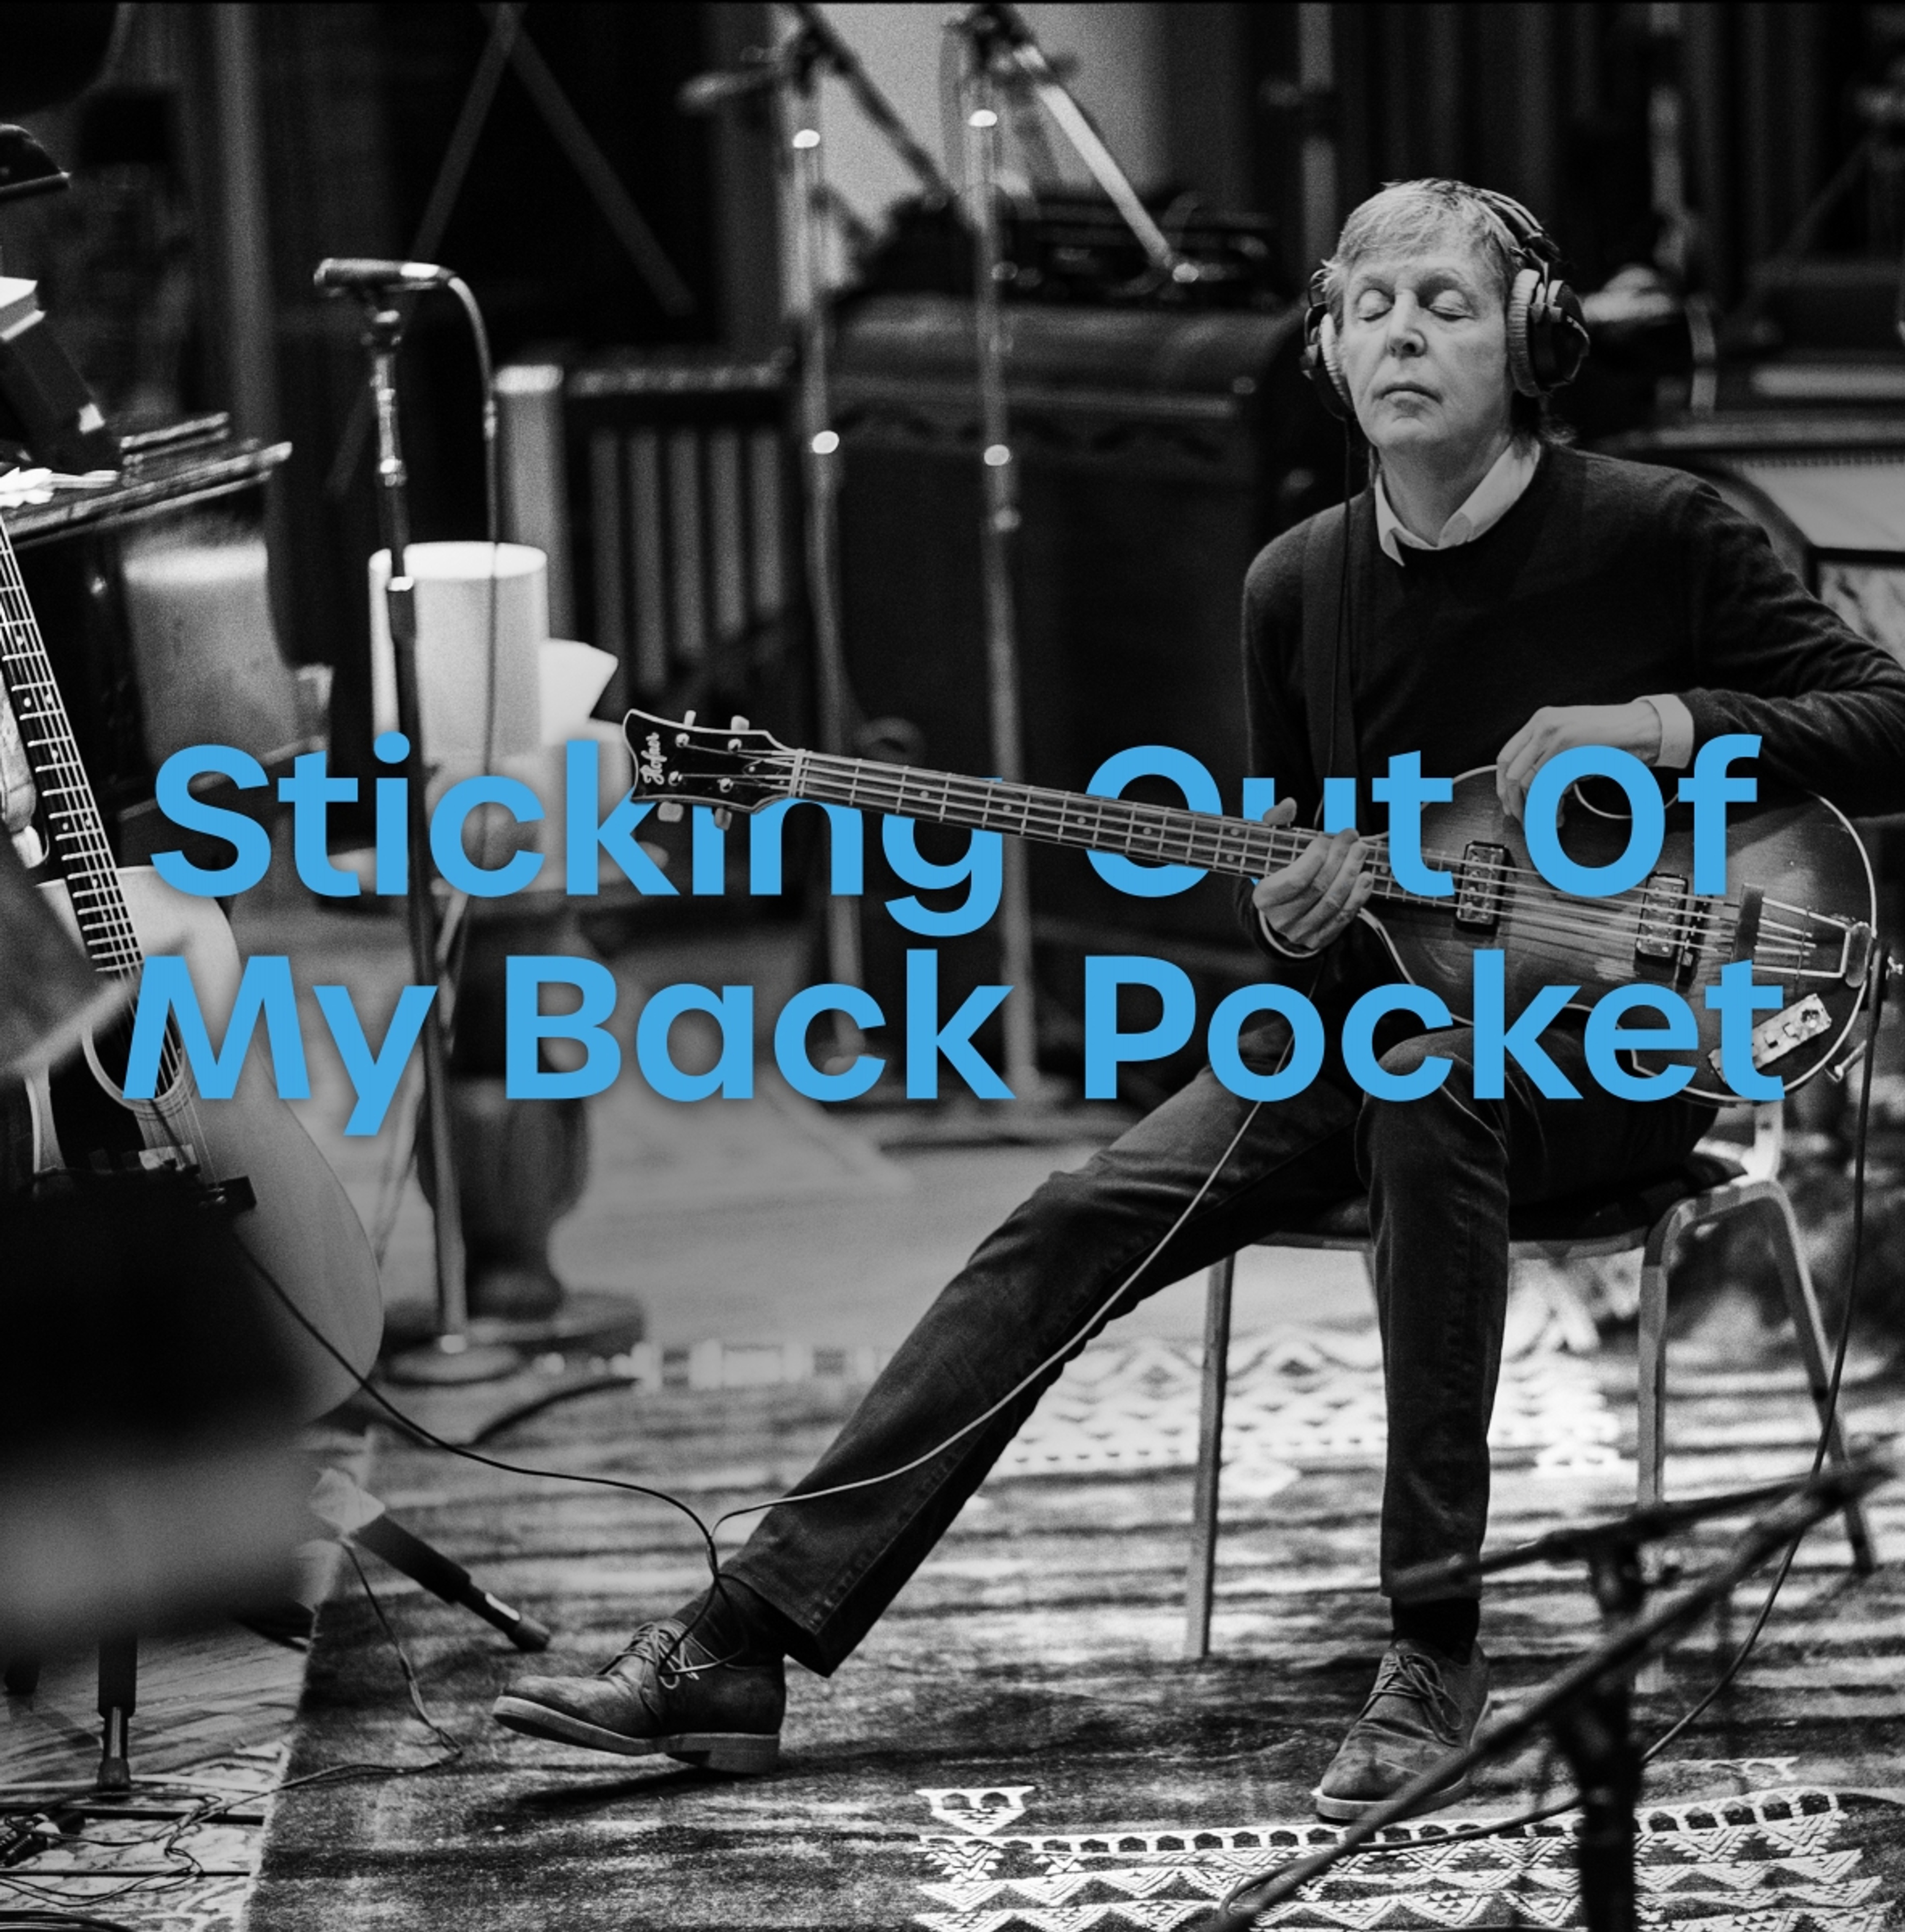 Photo of Paul playing guitar used for the 'Sticking Out Of My Back Pocket' playlist